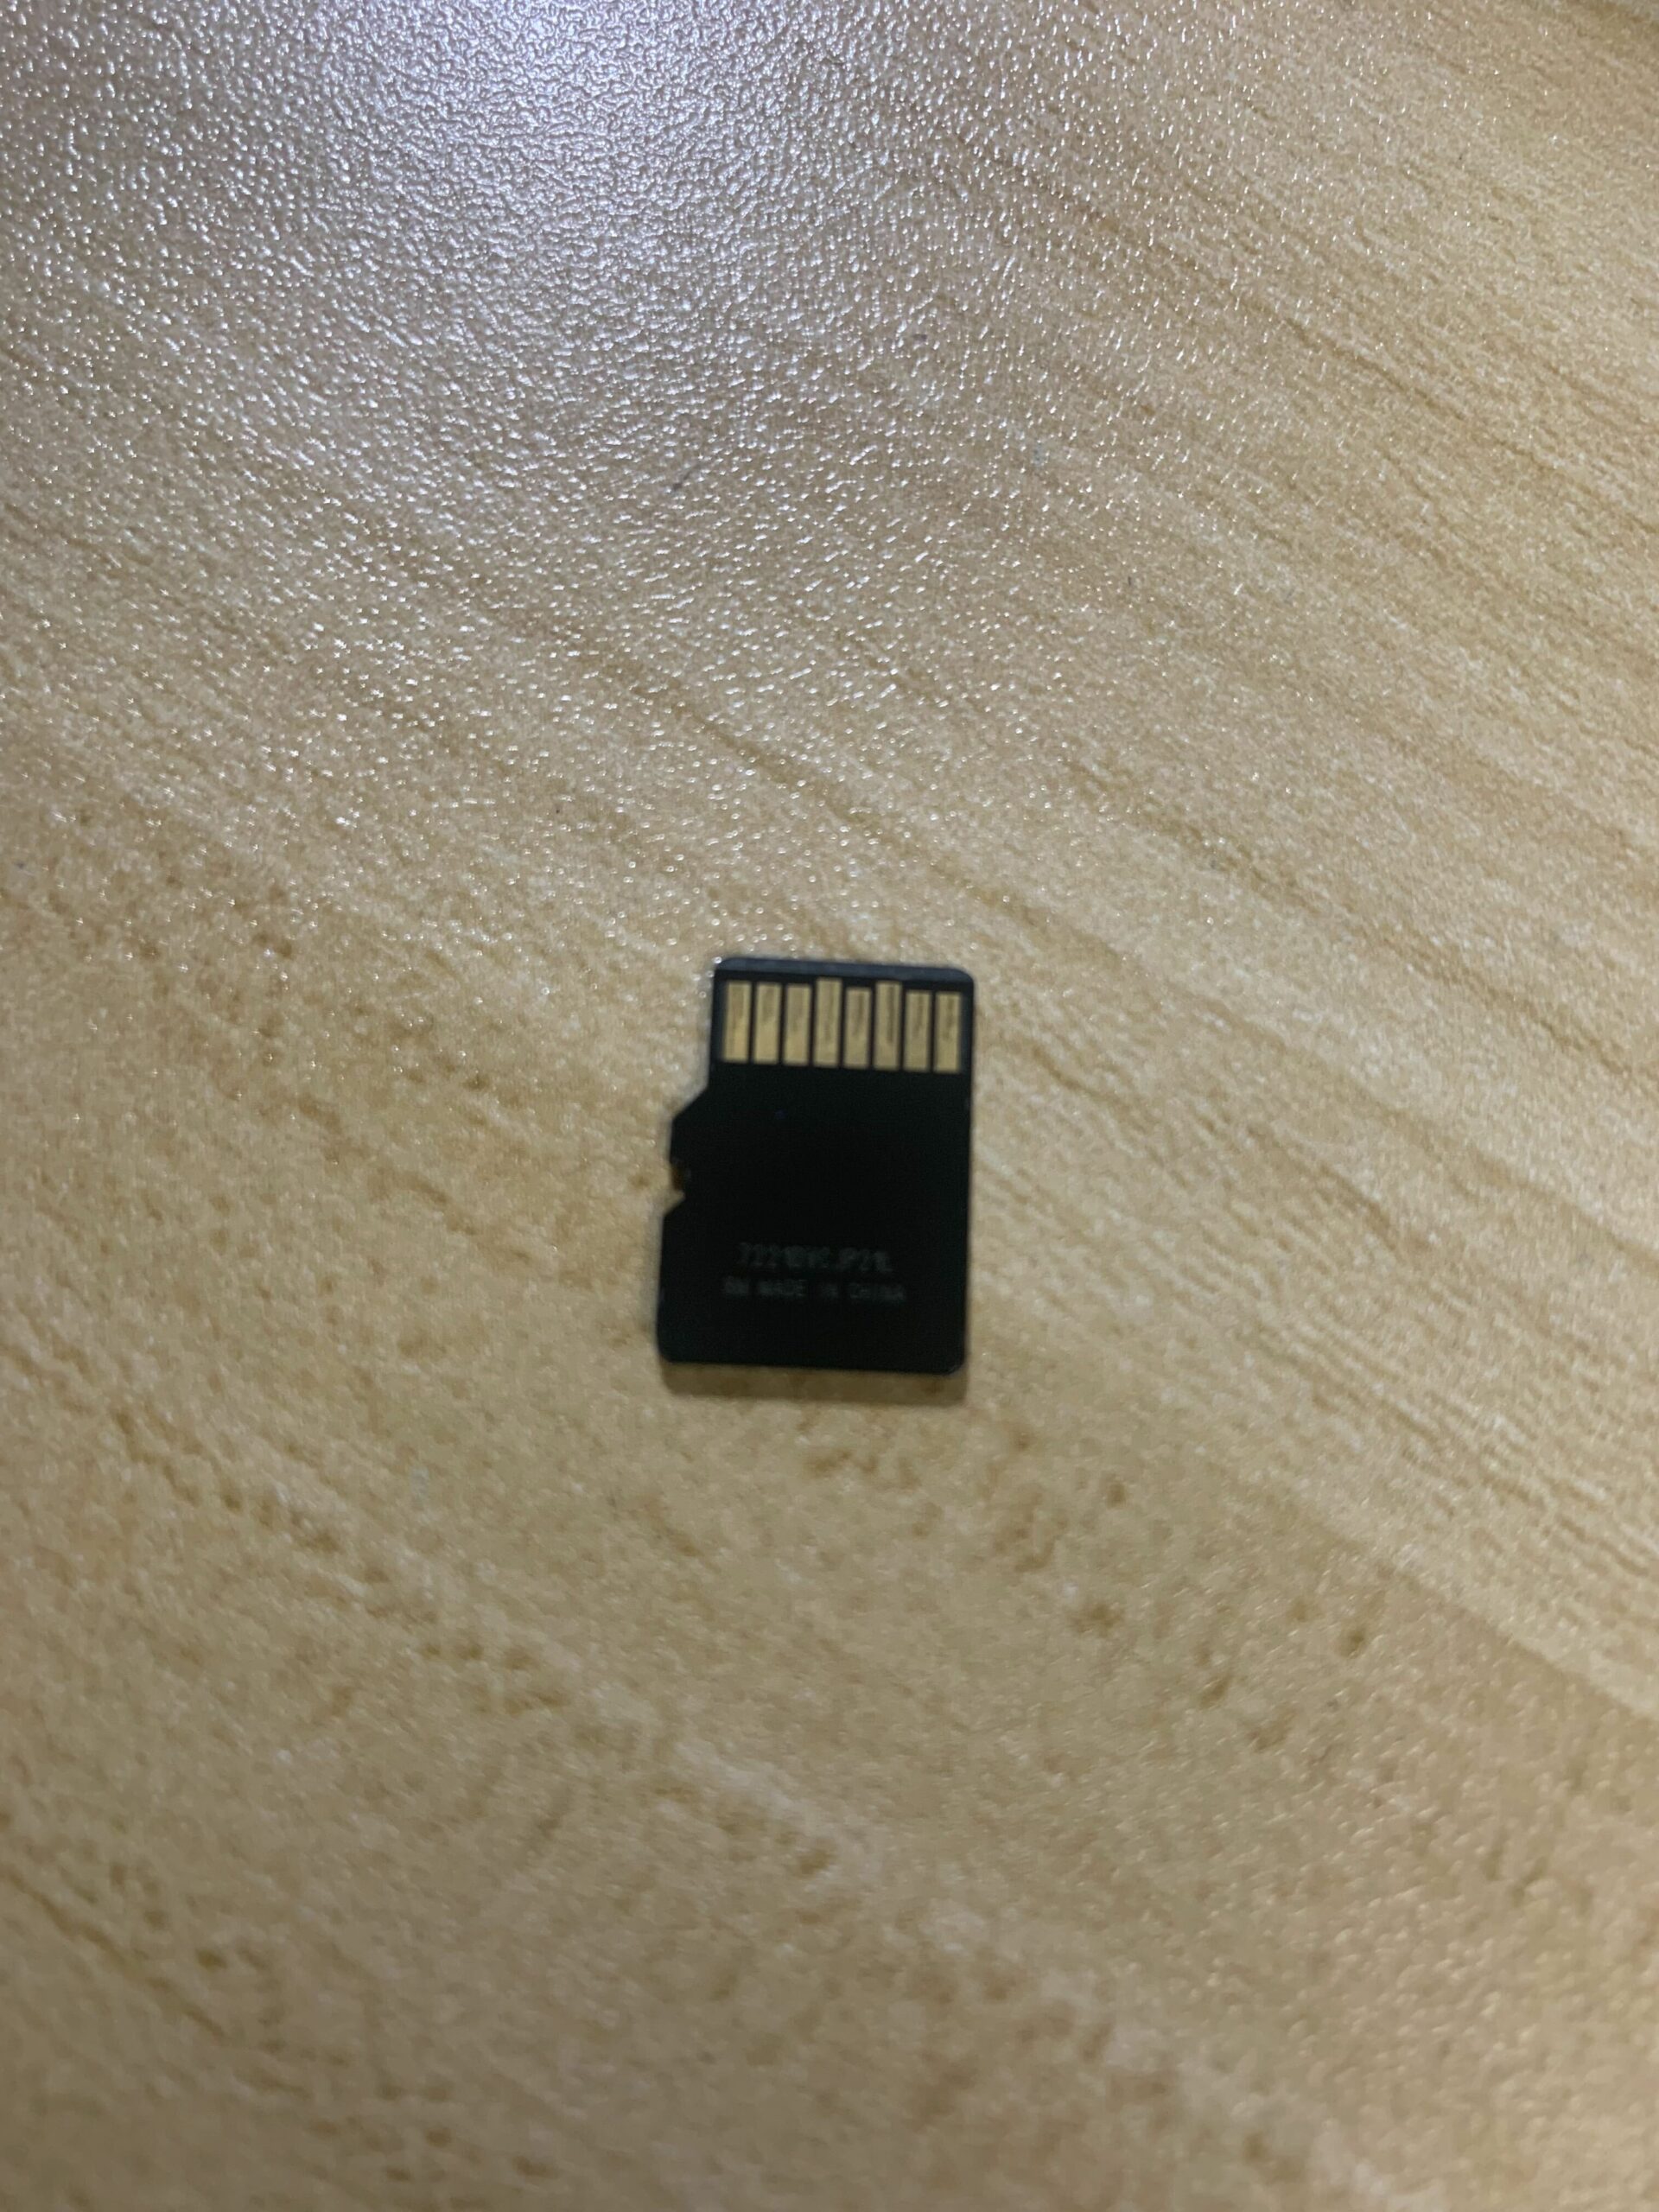 Sandisk Ultra Plus micro_SD back of memory card